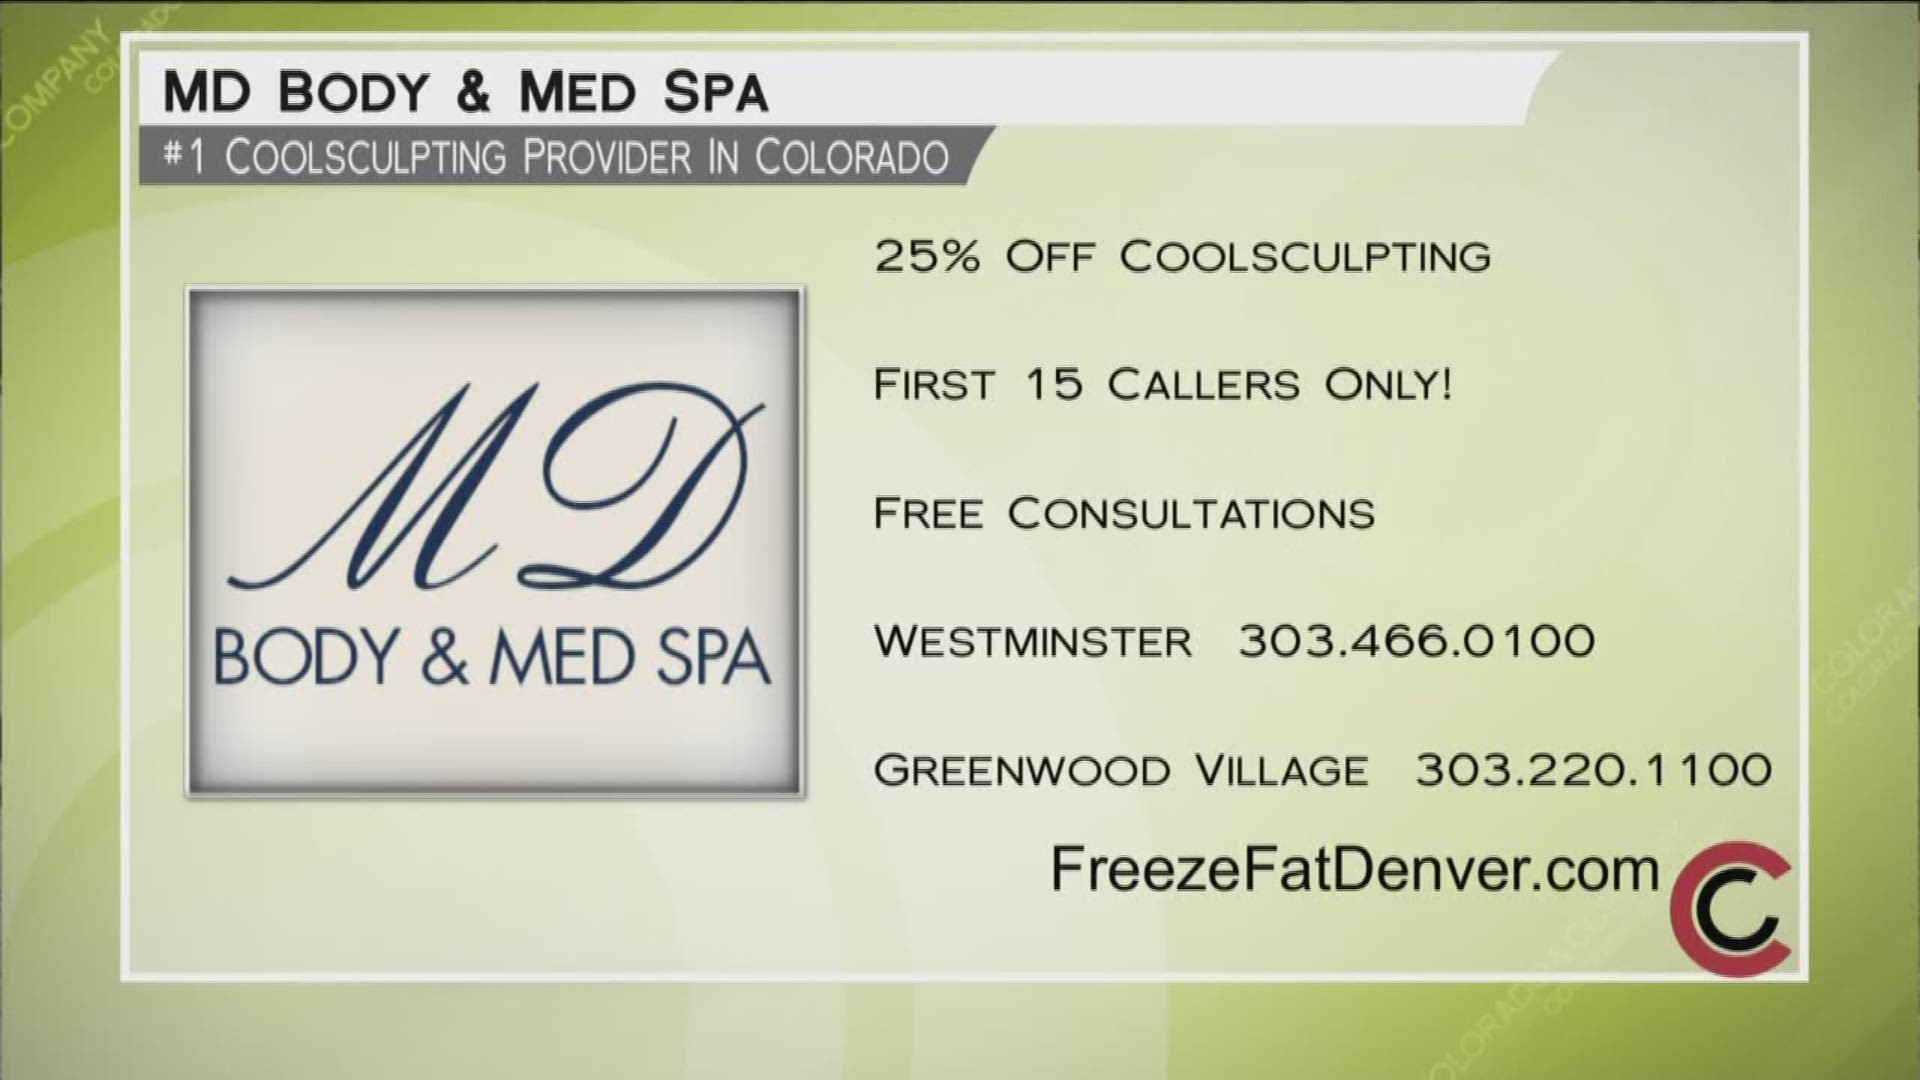 Check out the number one Coolsculpting provider in Colorado--MD Body and Med Spa. Learn about their daily specials at www.FreezeFatDenver.com.